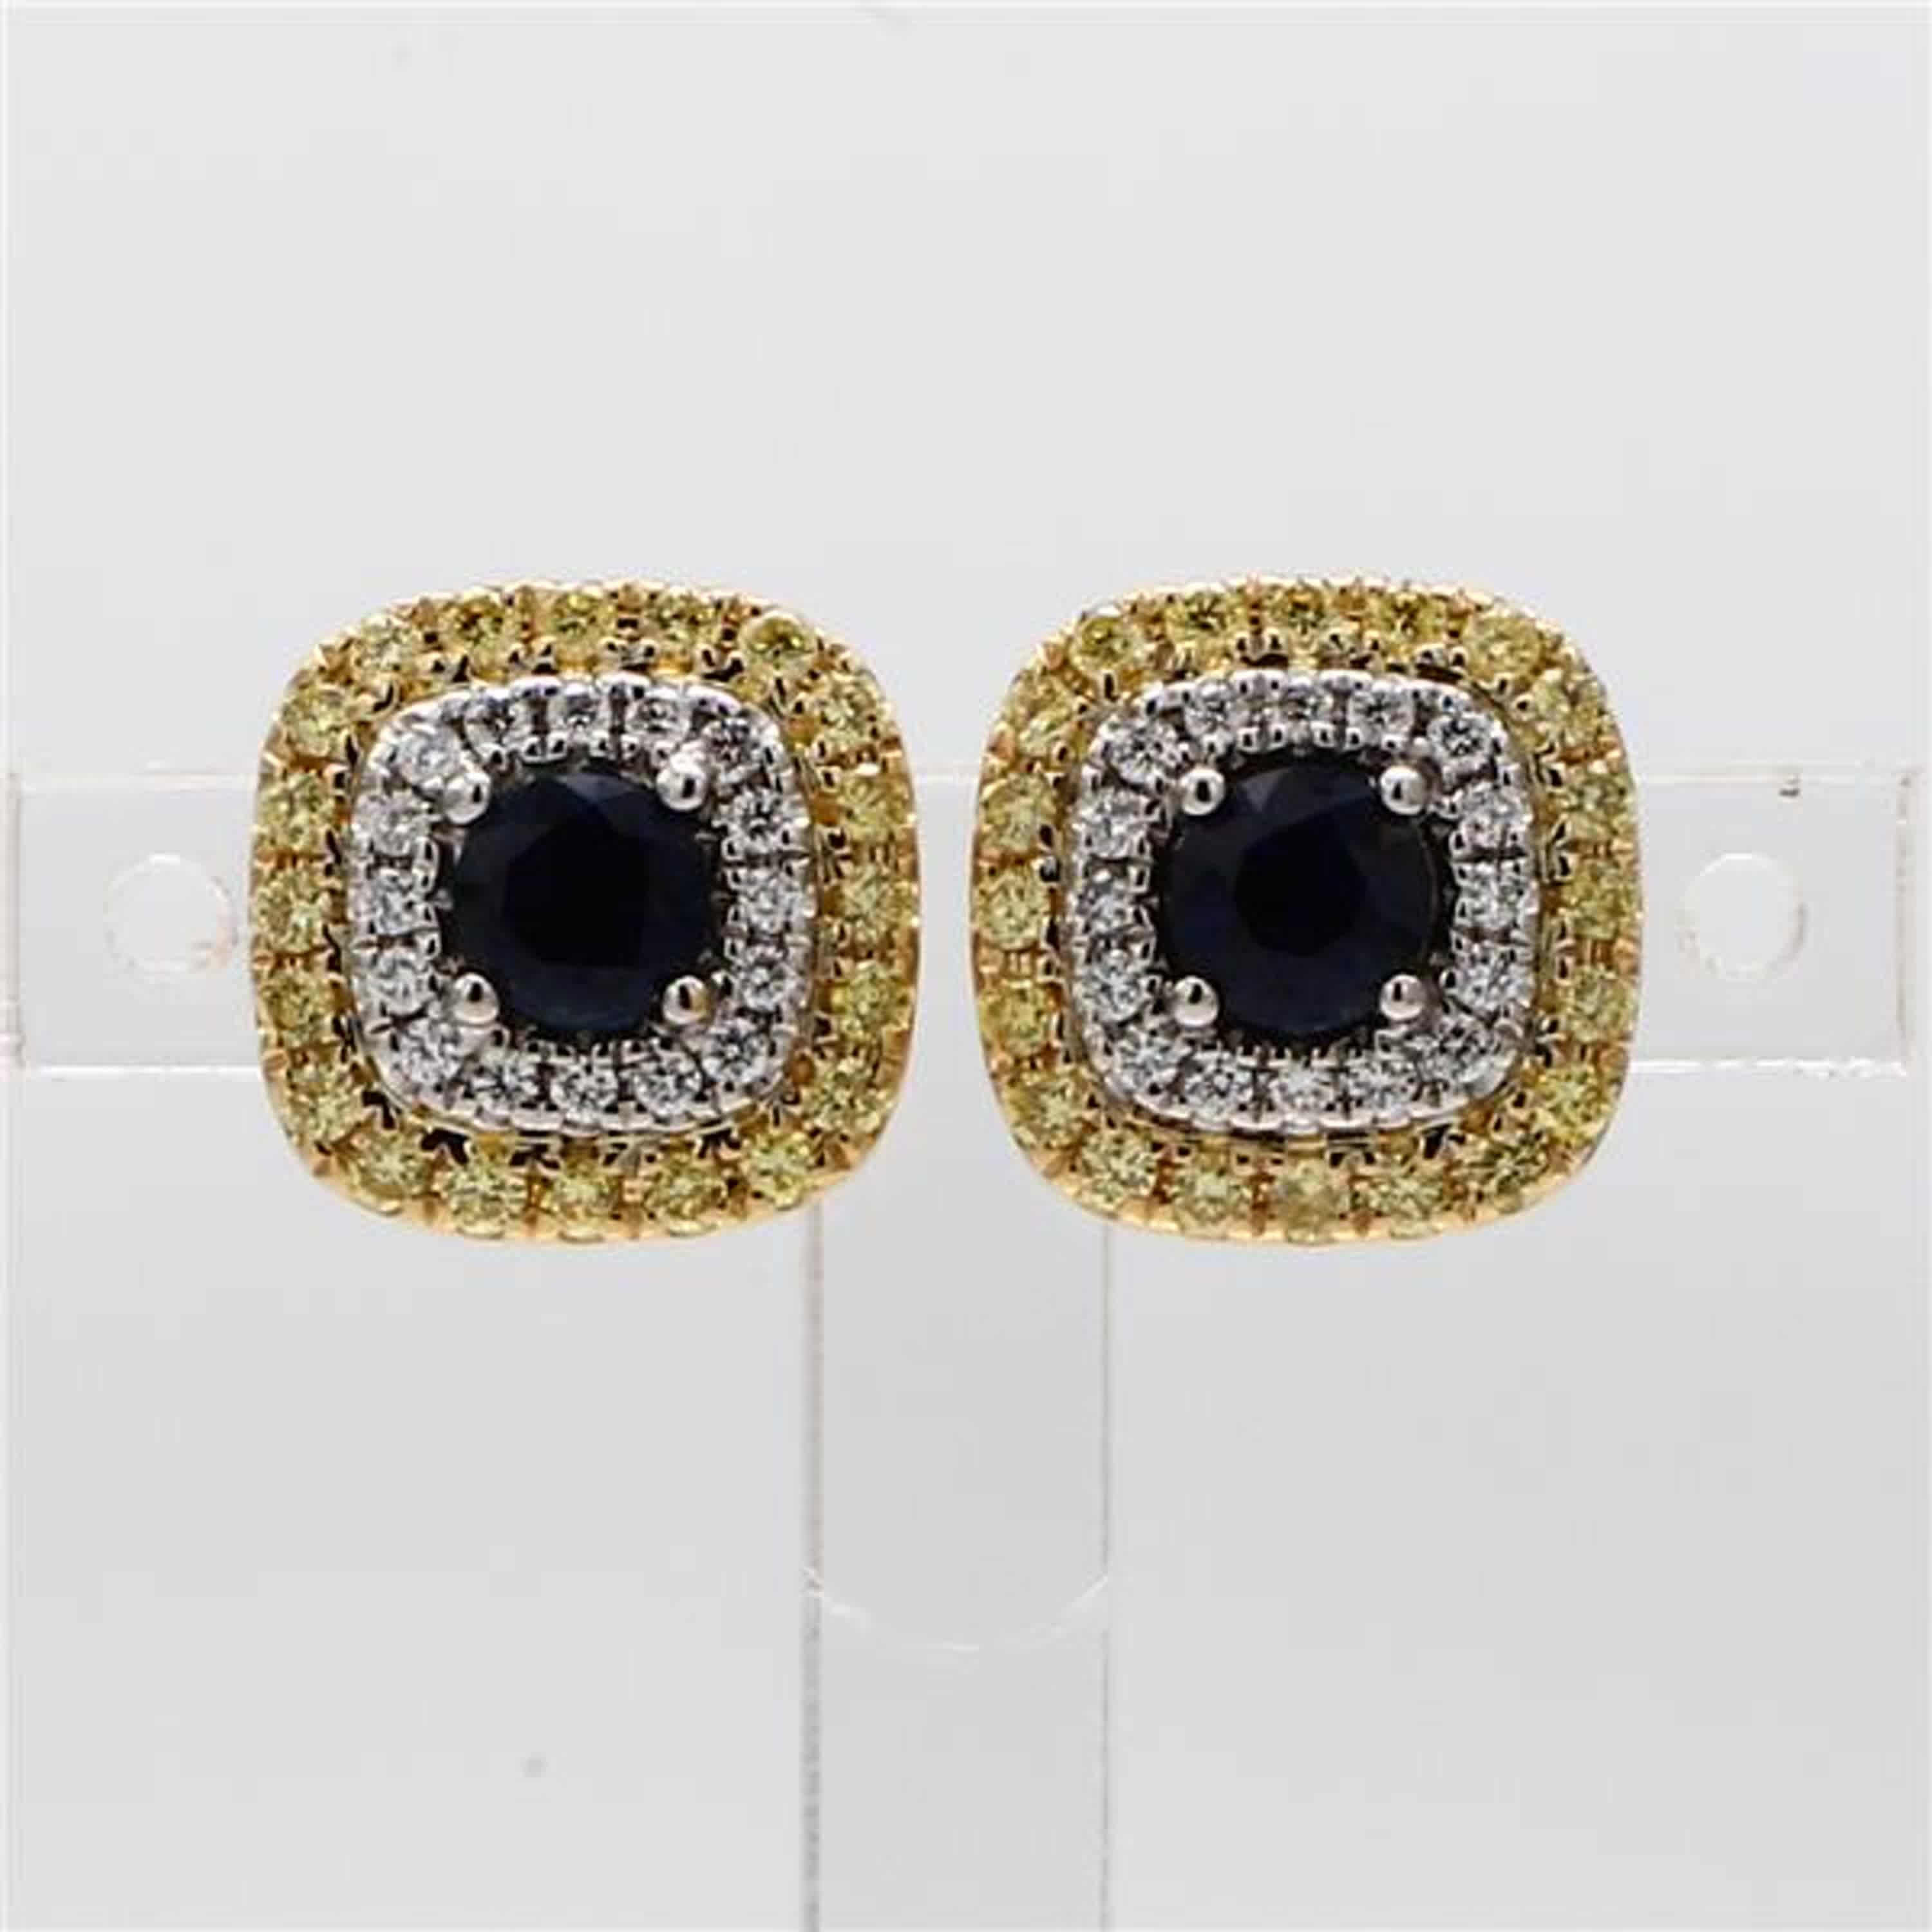 RareGemWorld's classic sapphire earrings. Mounted in a beautiful 18K Yellow and White Gold setting with natural round cut blue sapphires. The sapphires are surrounded by natural round white diamond melee and natural round yellow diamond melee. These